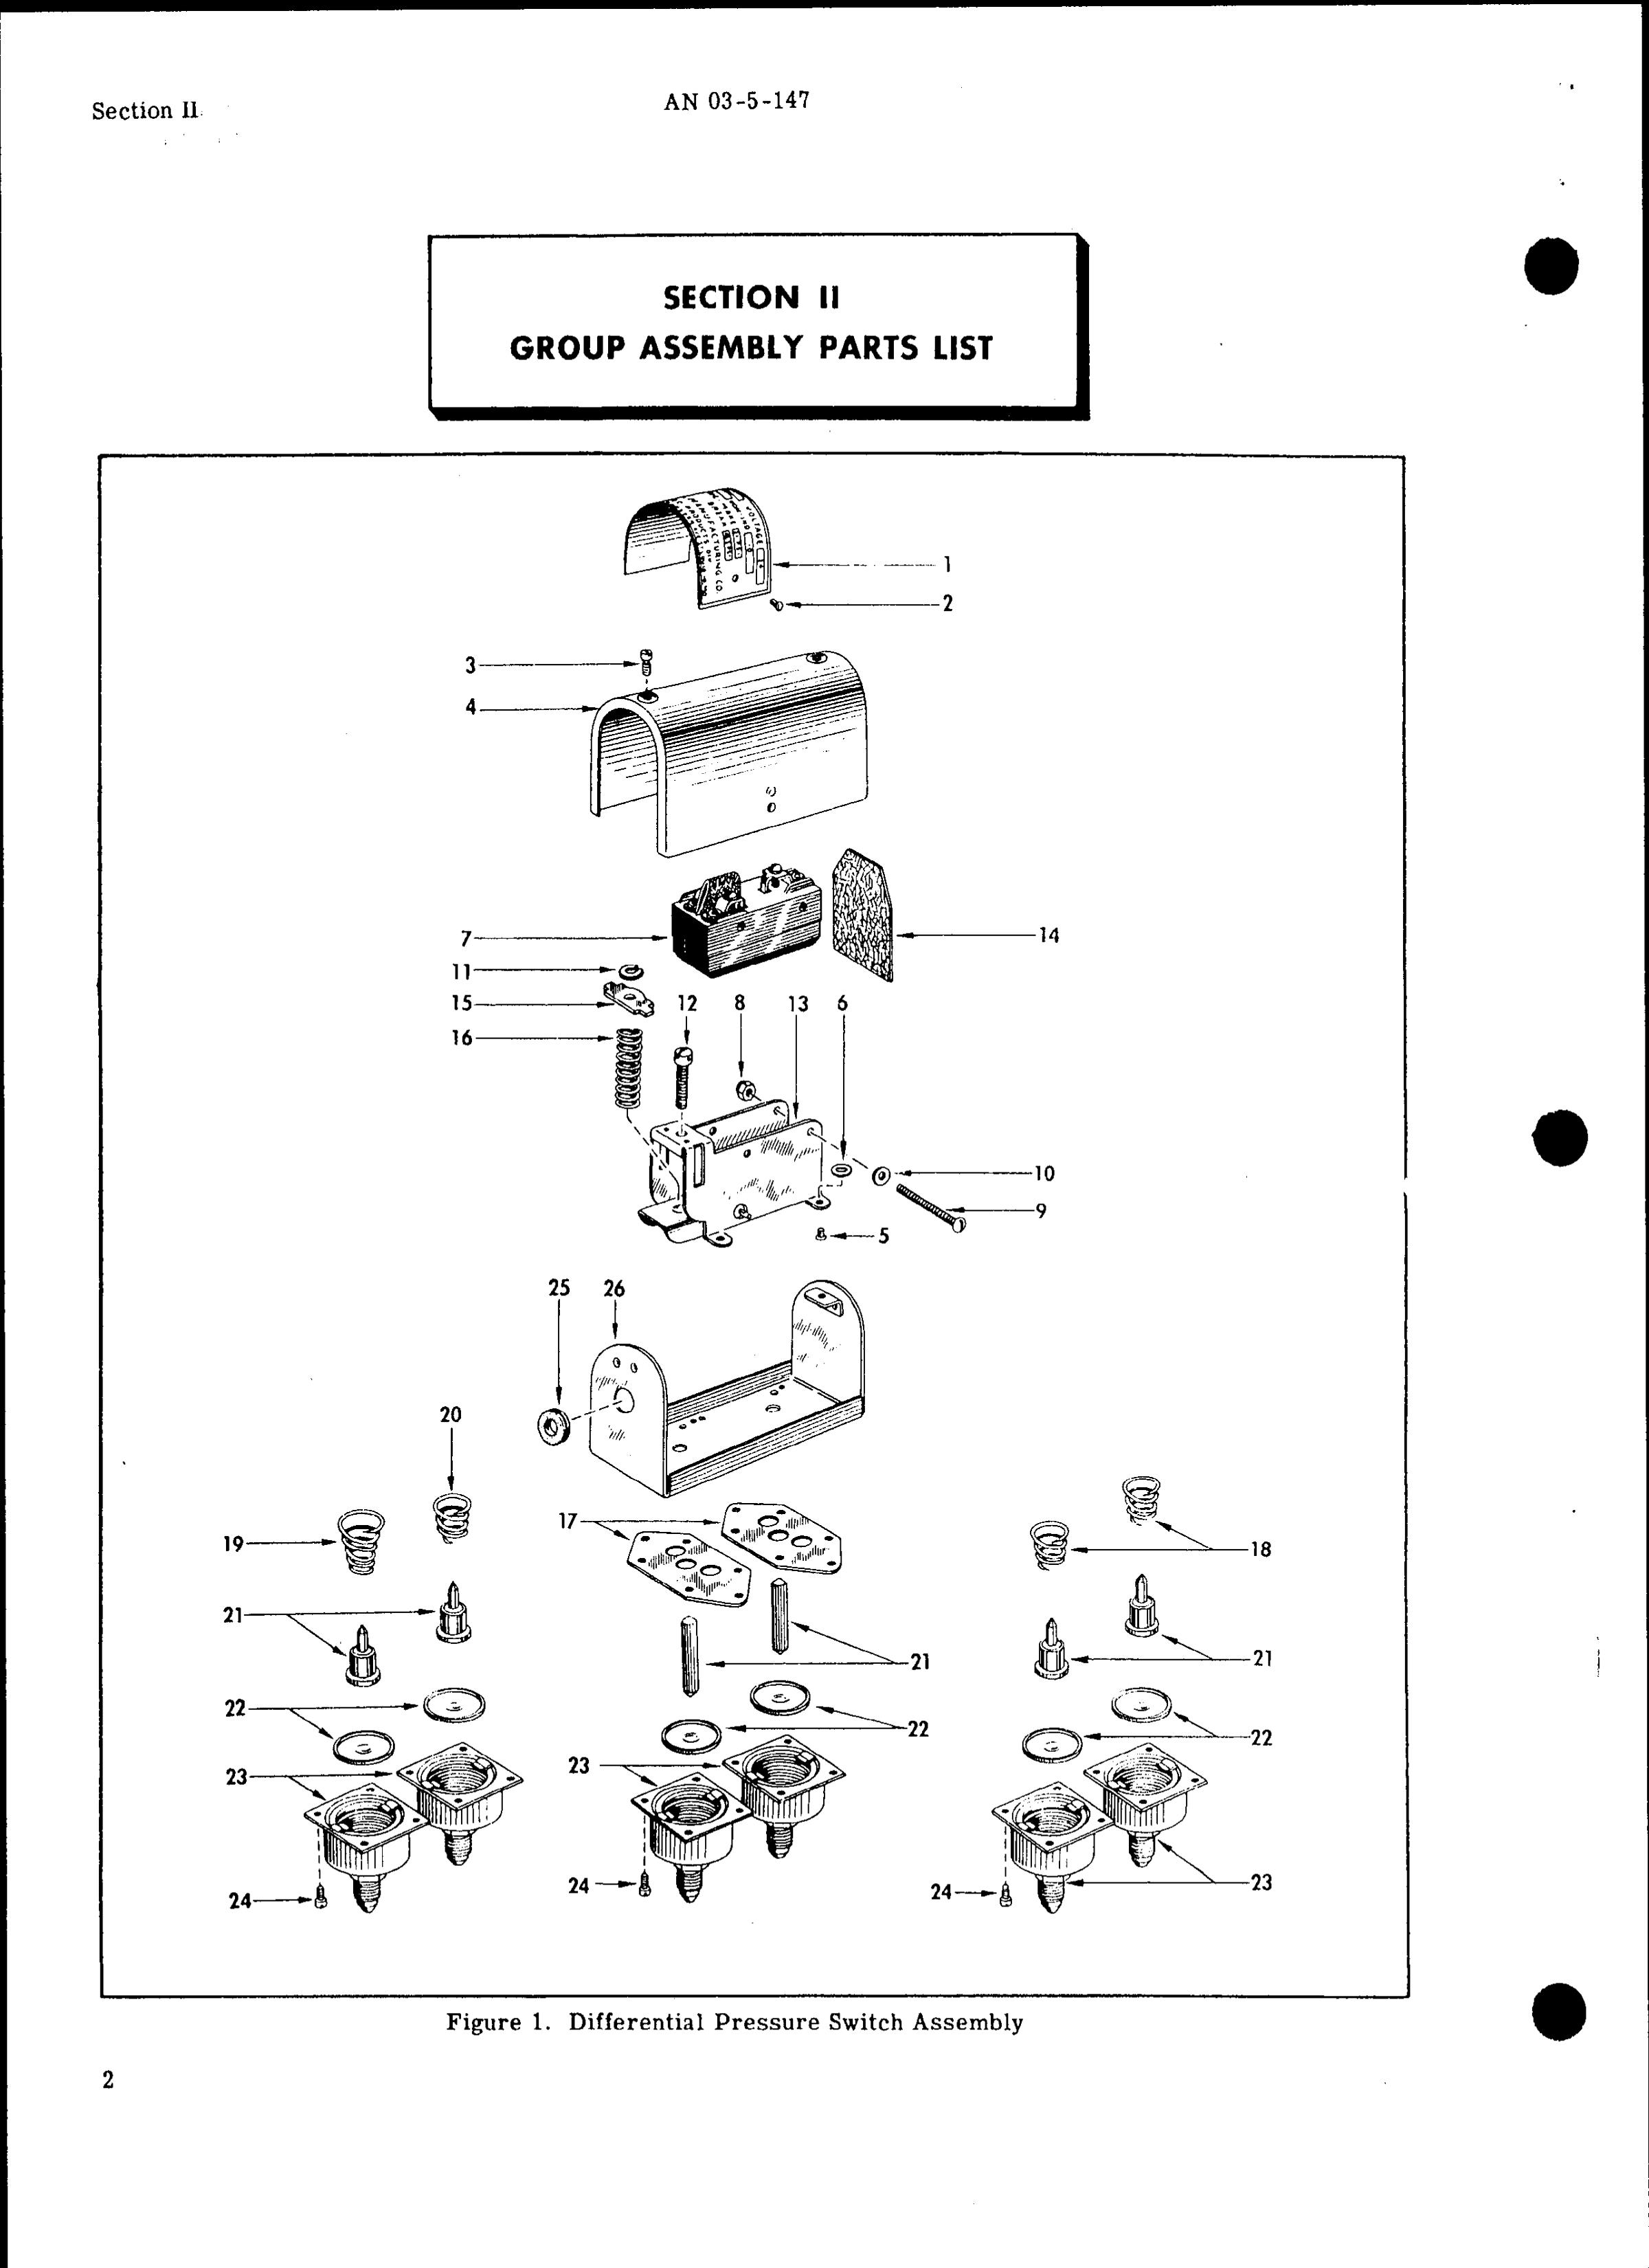 Sample page 4 from AirCorps Library document: Parts Catalog for Differential Pressure Switch (McQuay-Norris)